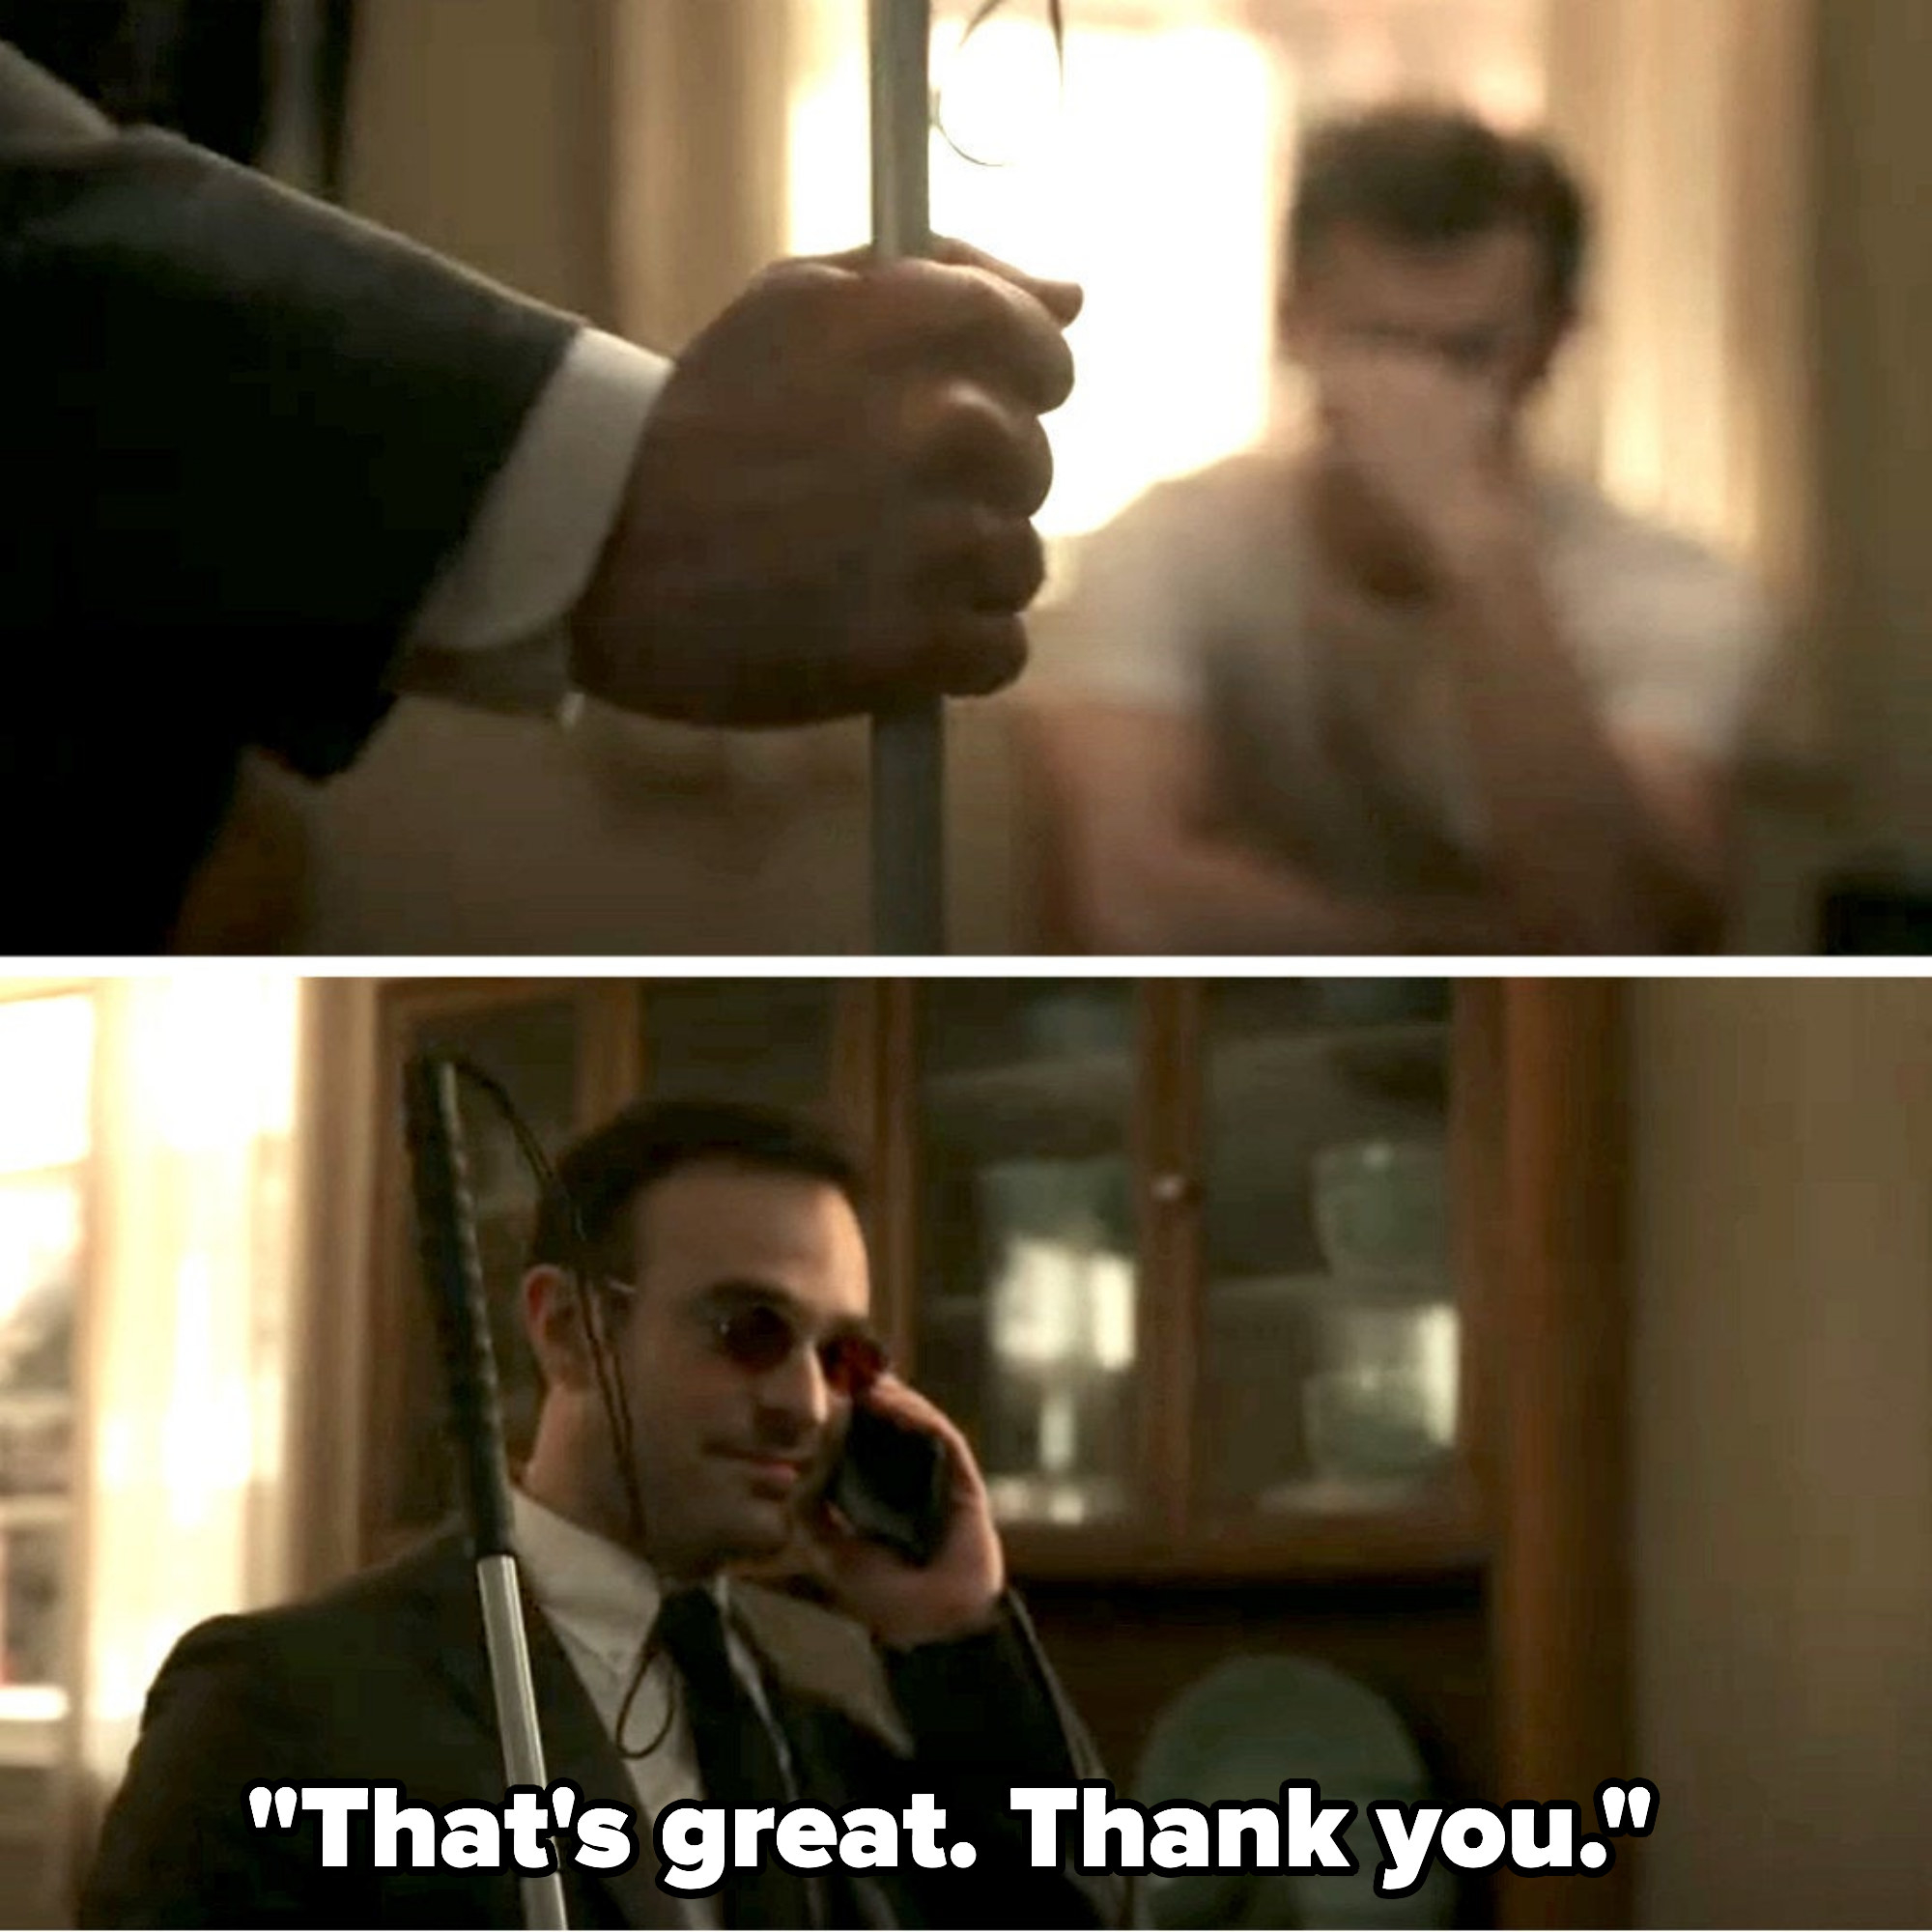 Matt&#x27;s cane comes into view then he says &quot;that&#x27;s great, thank you&quot; on the phone